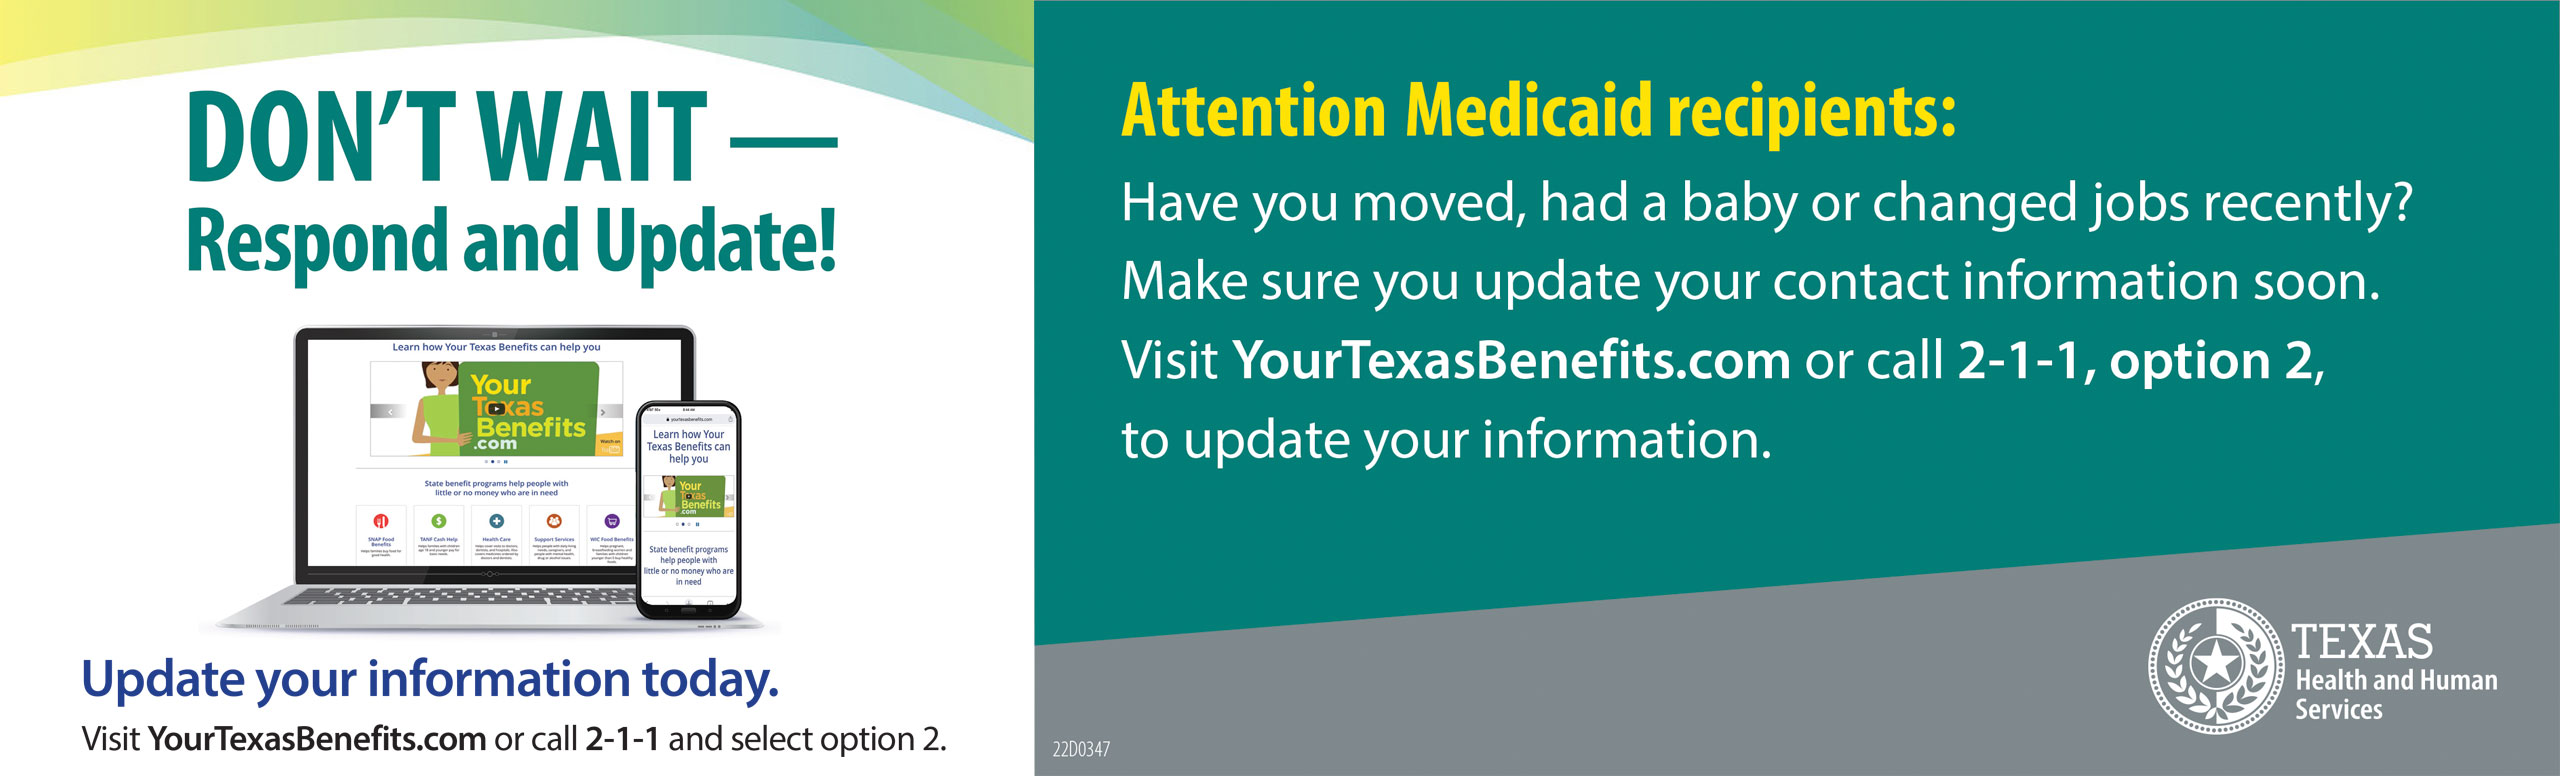 Don't Wait - Respond and Update!

Update your information today.

Visit YourTexasBenefits.com or call 2-1-1 and select option 2. 

Attention Medicaid recipents:
Have you moved, had a baby or changed jobs recently? Make sure update your contact information soon. Visit YourTexasBenefits.com or call 2-1-1, option 2, to update your information.